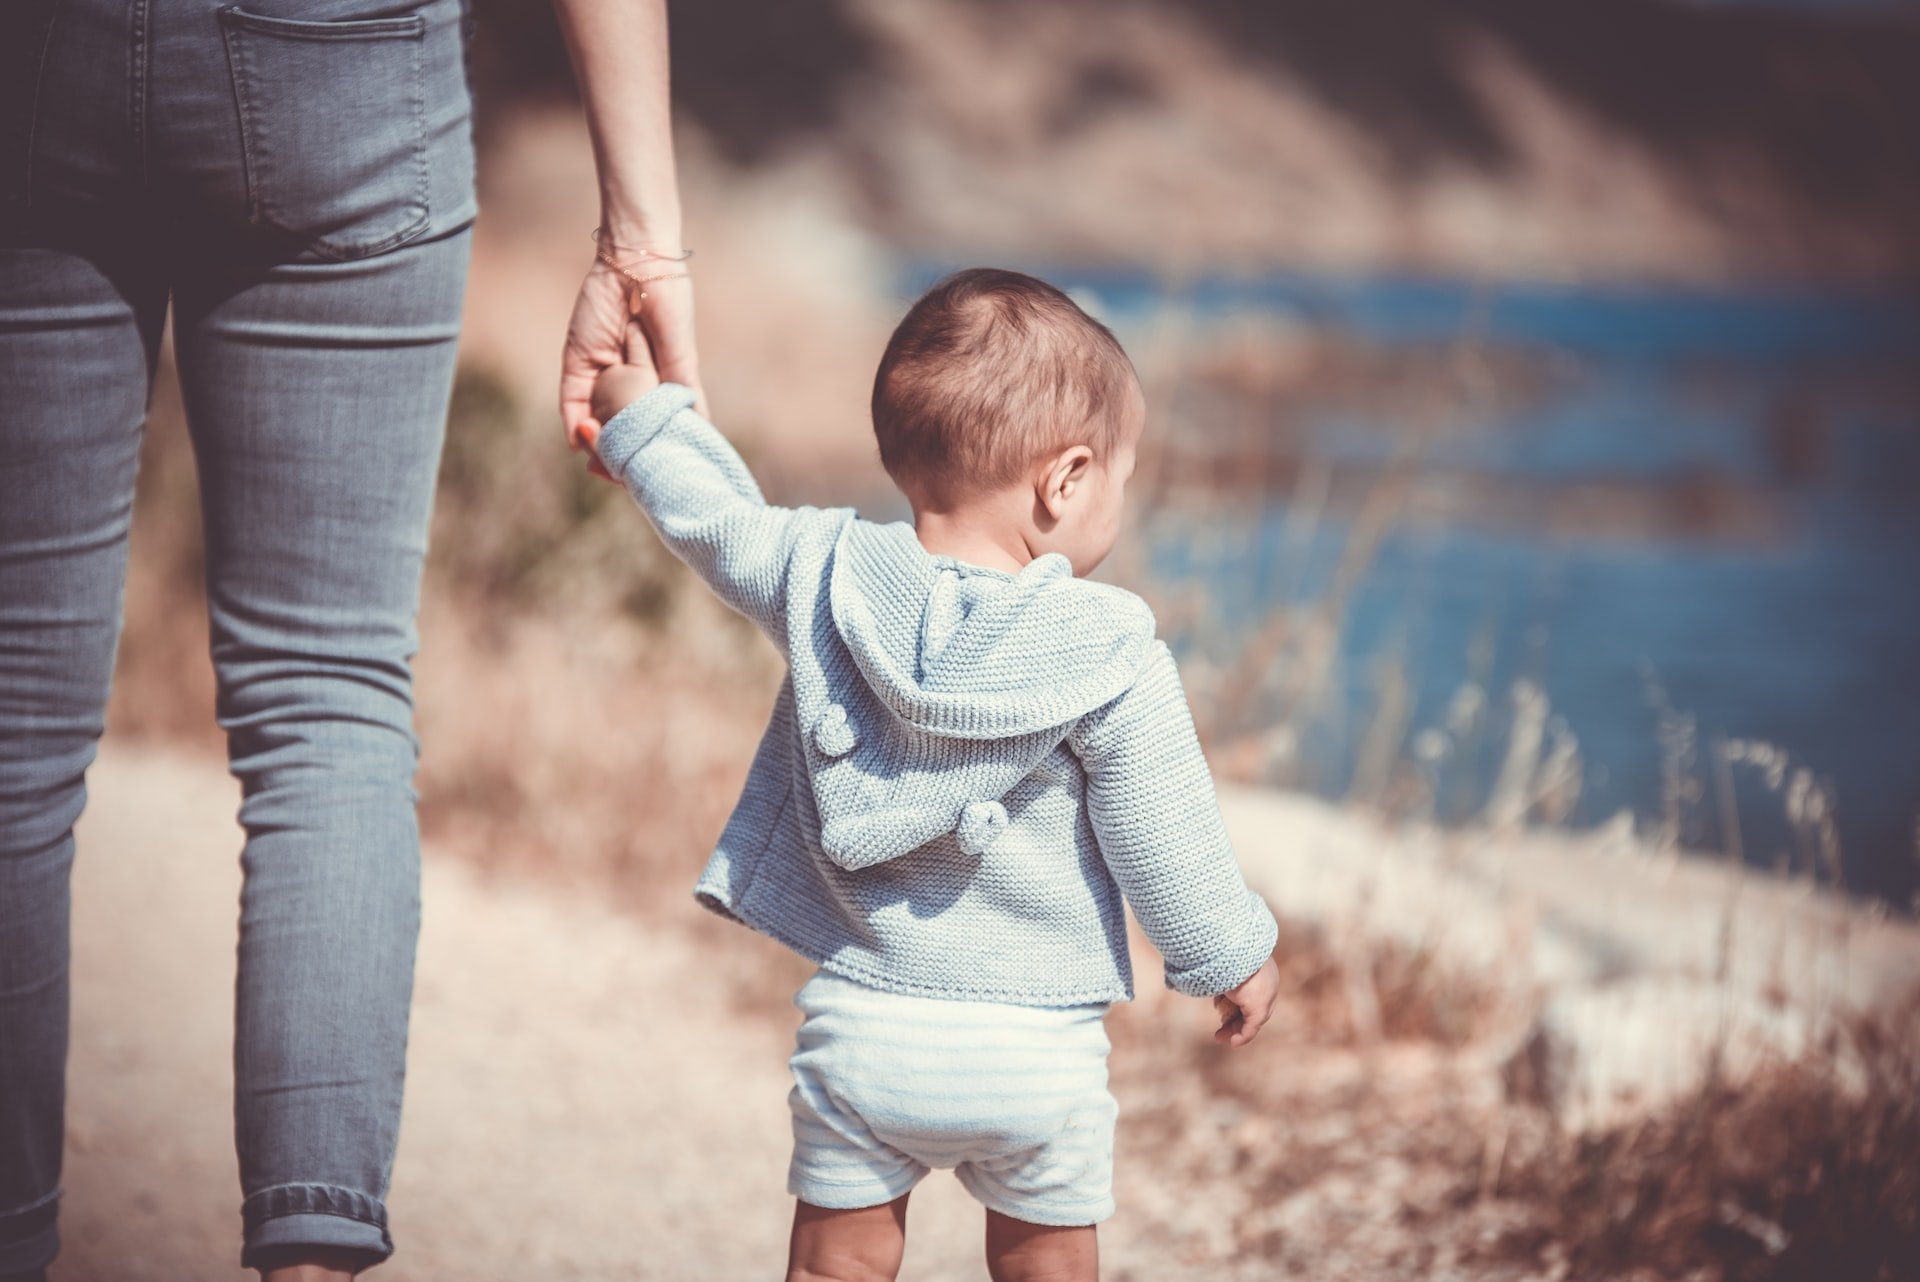 should single parents be allowed to adopt